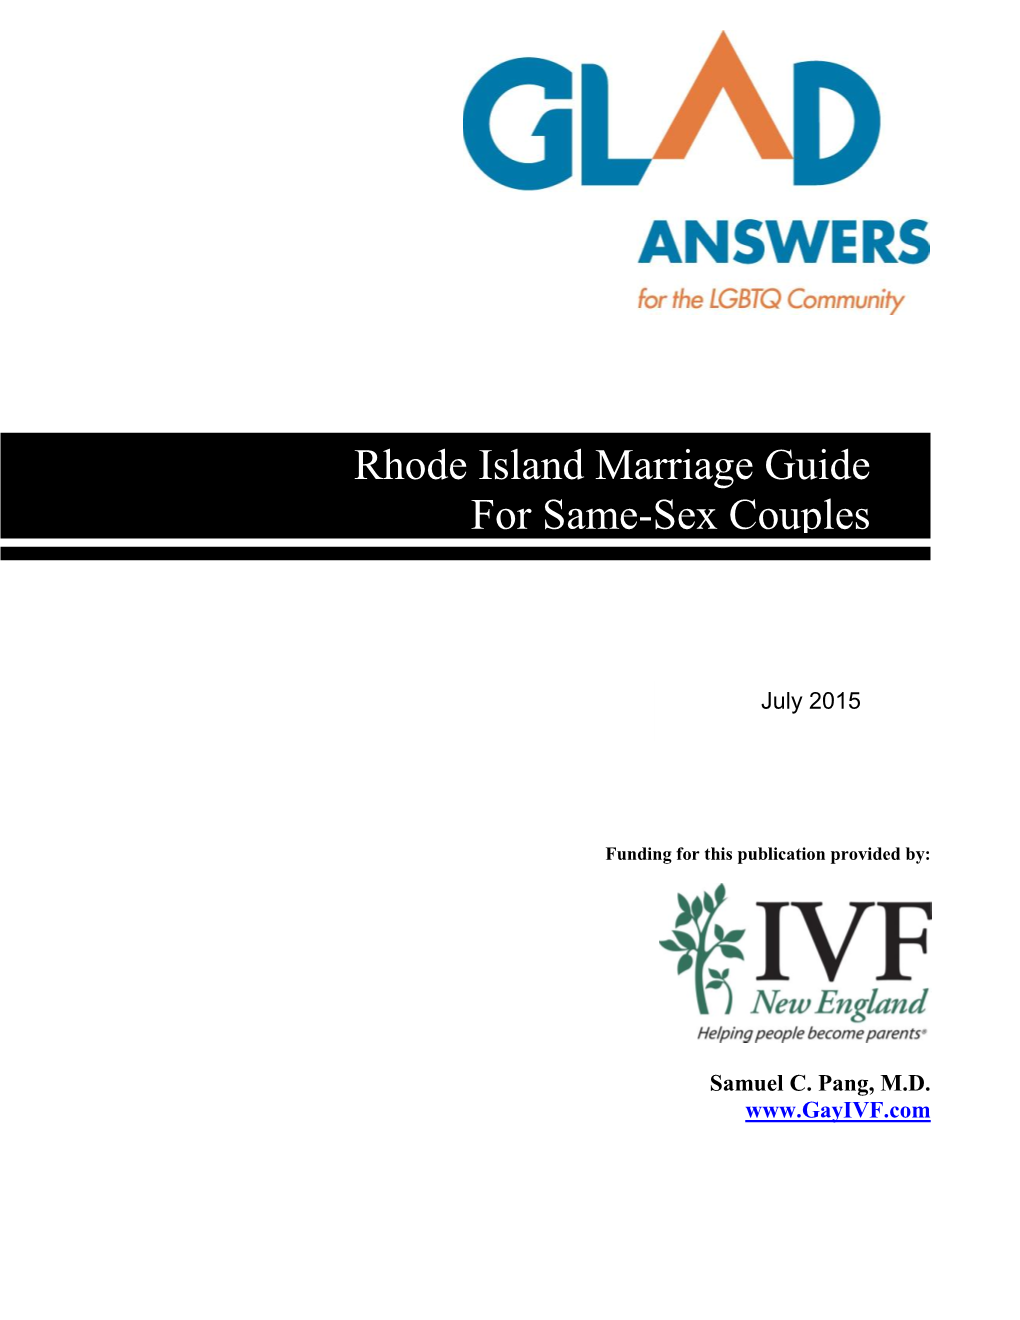 Rhode Island Marriage Guide for Same-Sex Couples